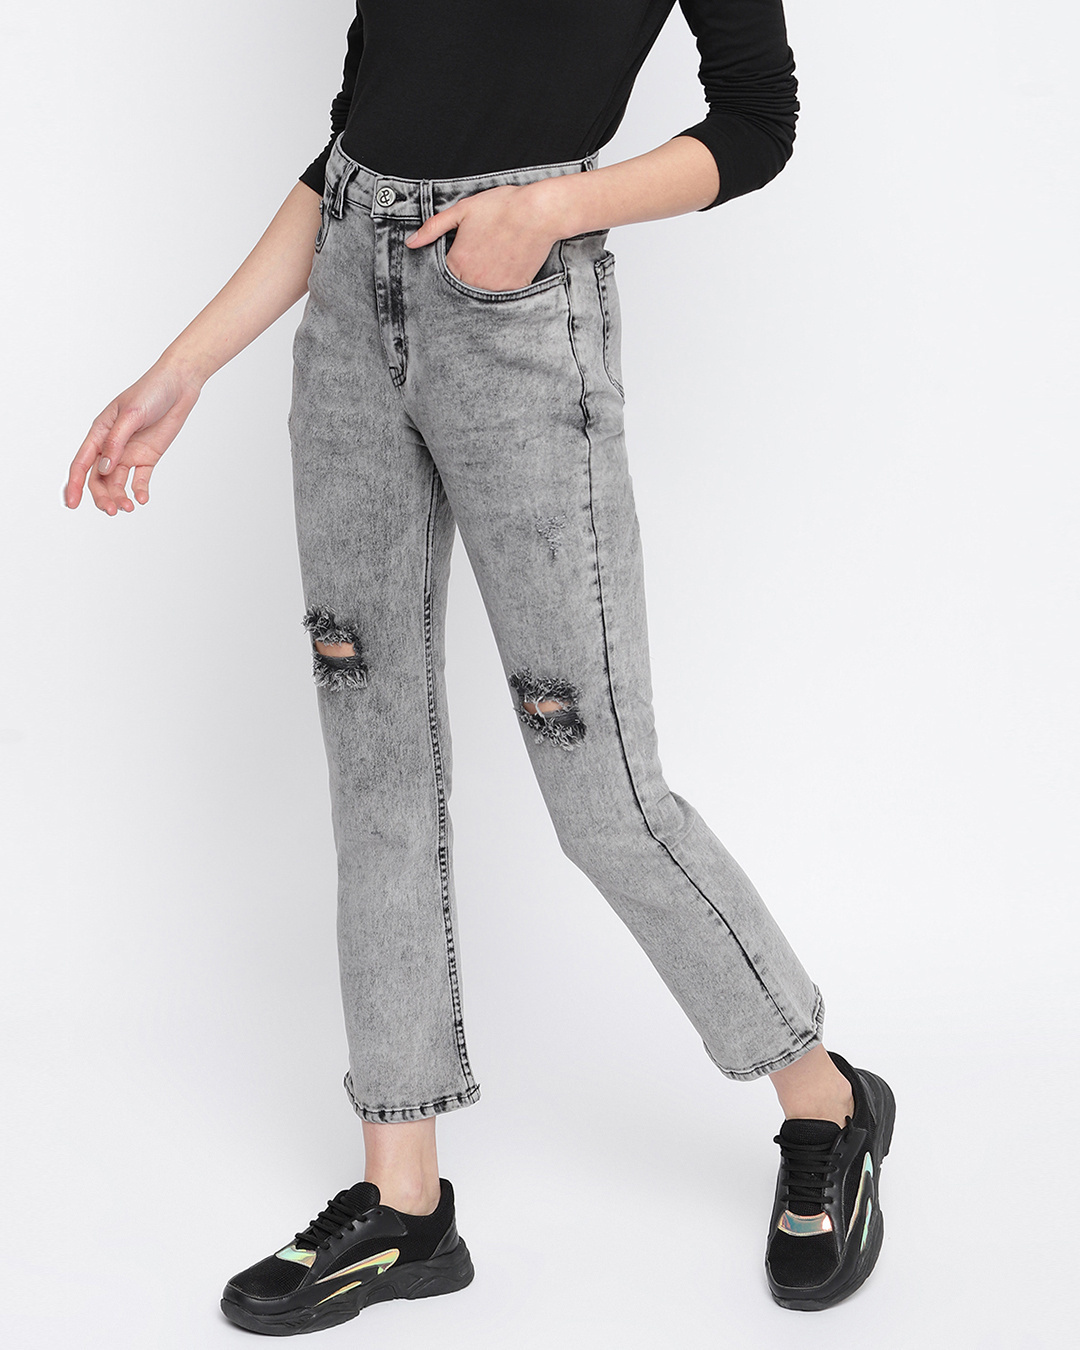 Buy Women's Grey Ripped Bootcut Jeans for Women Grey Online at Bewakoof